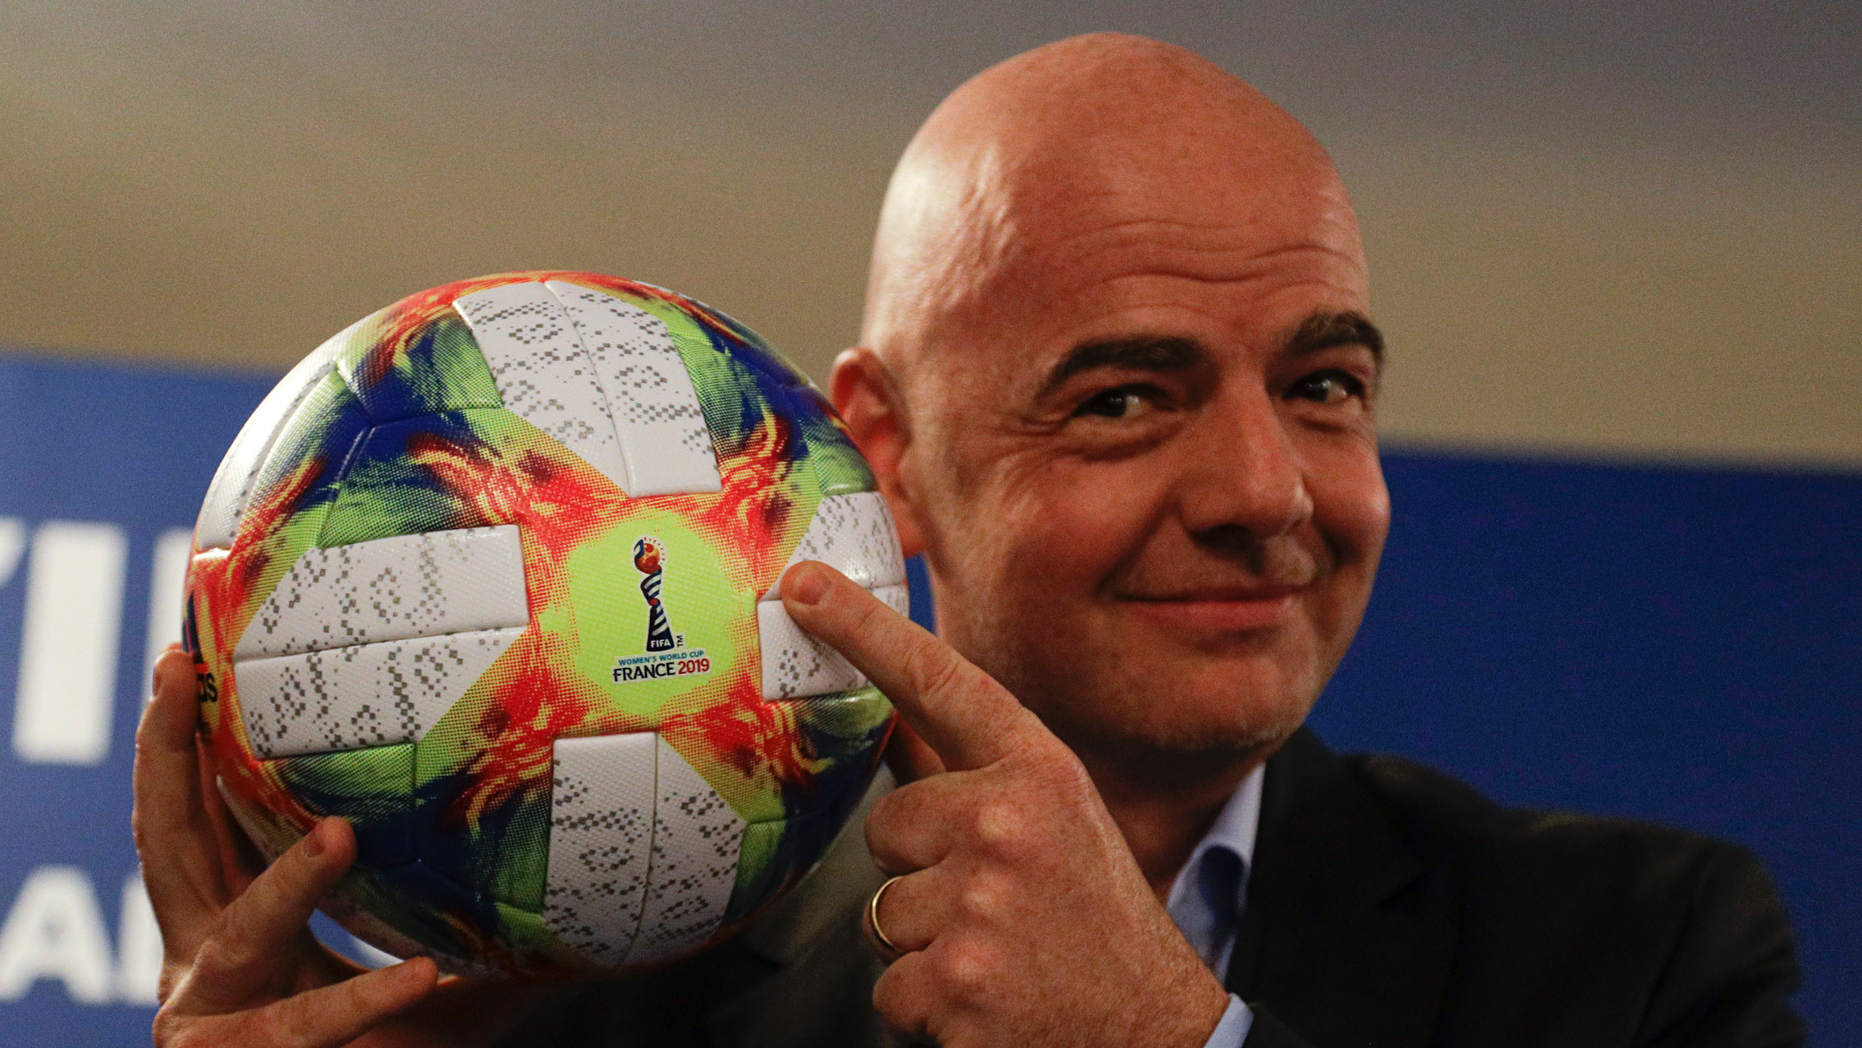 FIFA President Gianni Infantino holds the official ball of the next World Women's Football Championship and poses in front of photographers at a press conference at the end of an executive committee meeting Rome, Wednesday, February 27, 2019. (AP Photo / Gregorio Borgia)